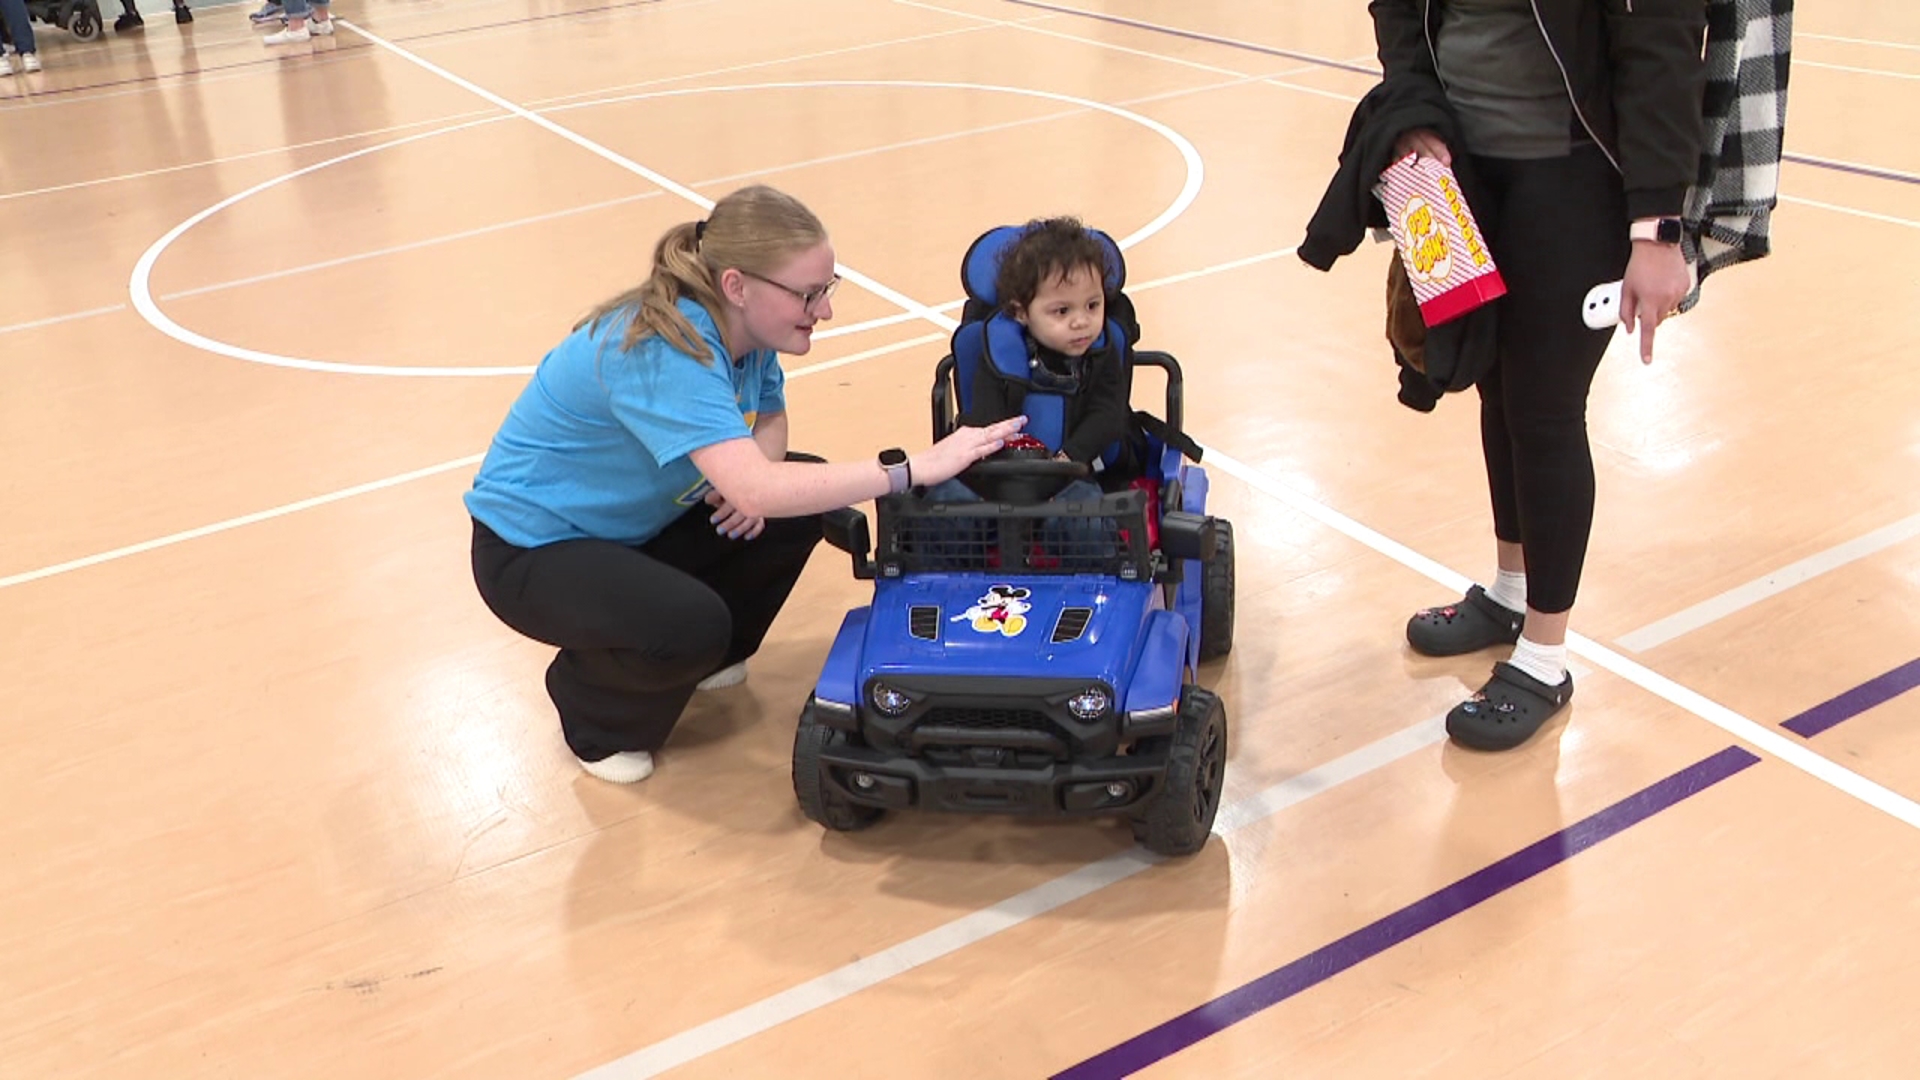 University of Scranton students helped give the gift of mobility to kids at a special Go Baby Go event.